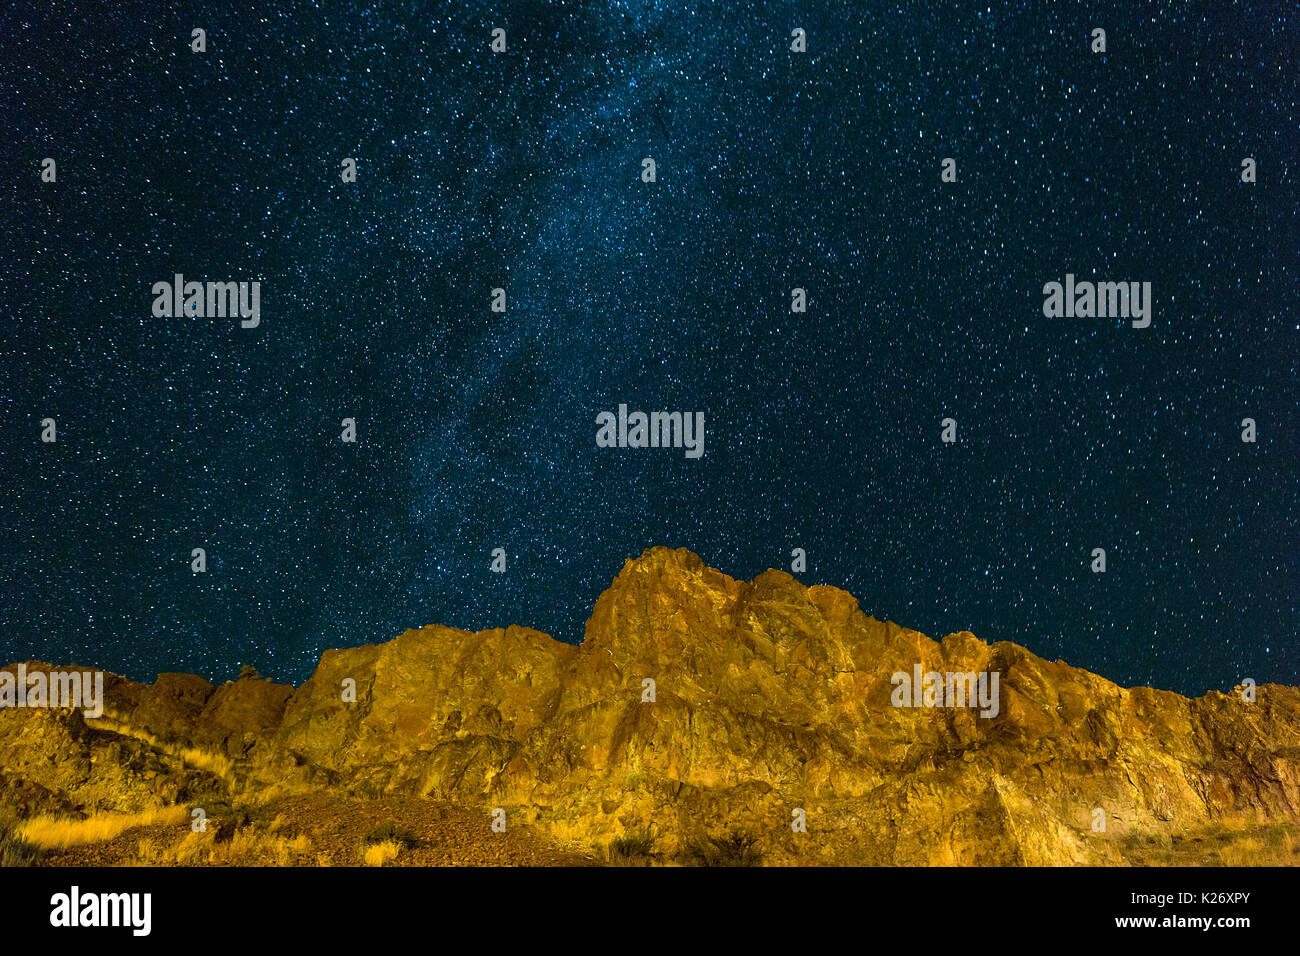 Starry night sky over rocky hilly terrain landscape in high desert Central Oregon Stock Photo